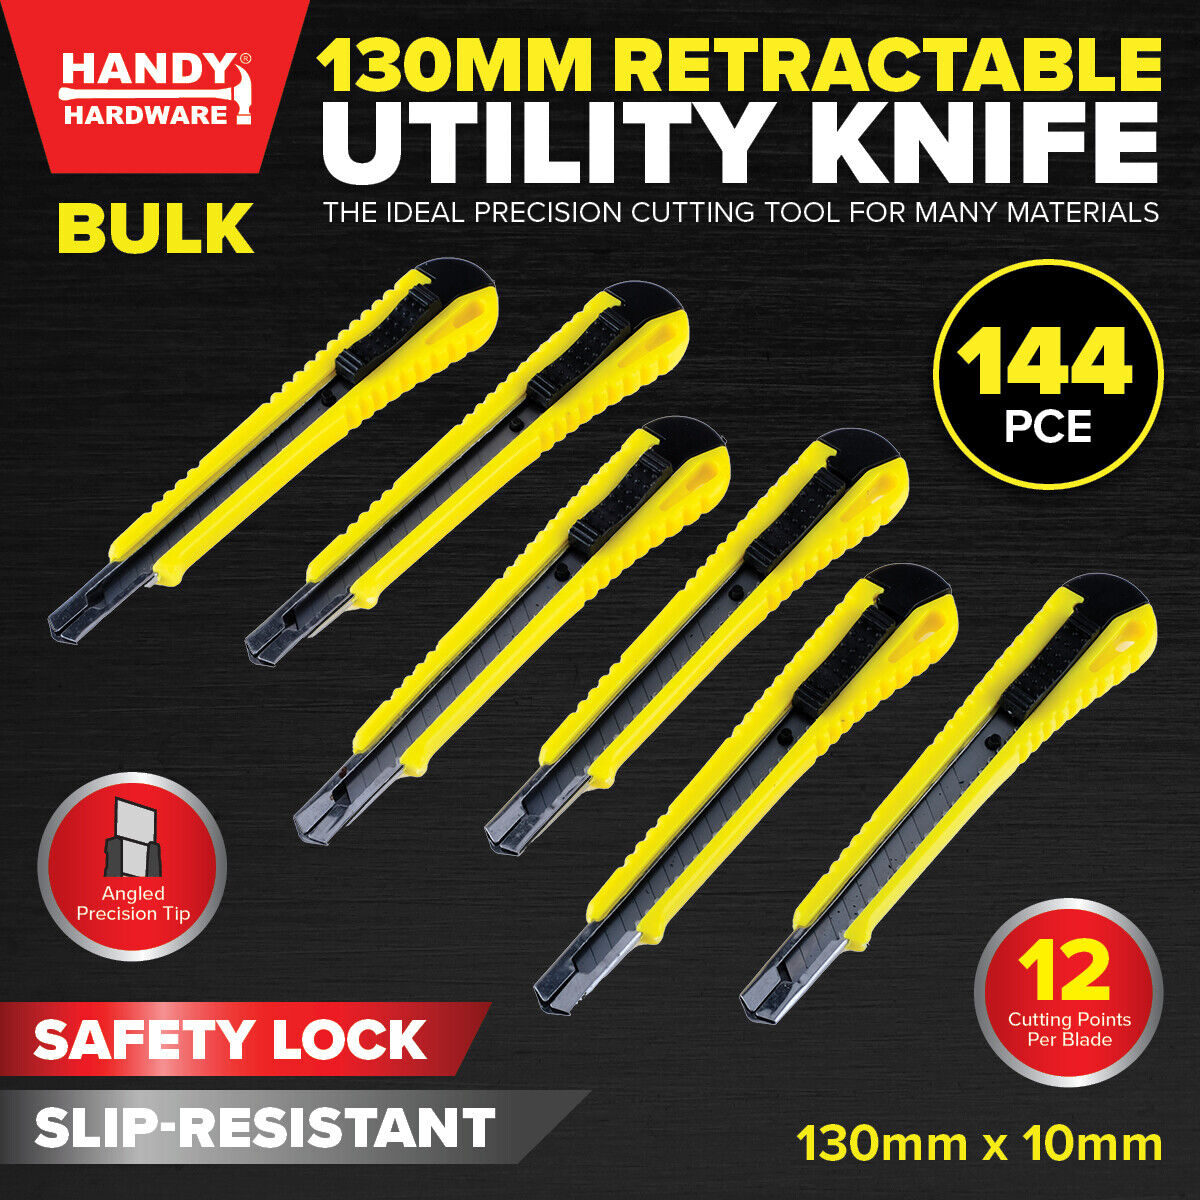 Handy Hardware® 144PCE Utility Knife Retractable Safety Lock Easy Slide 130mm